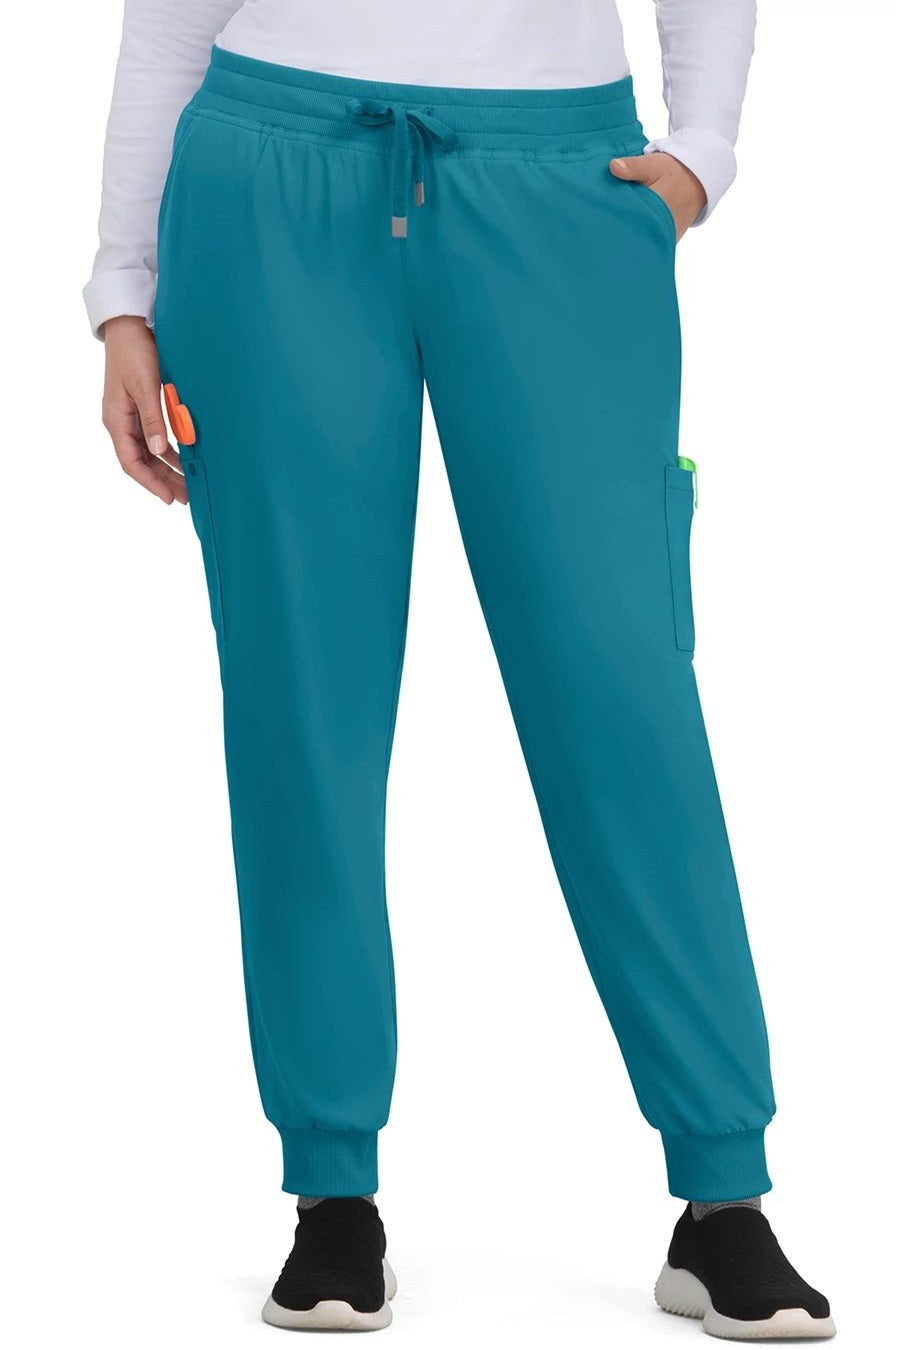 koi Scrub Pants Cureology Pulse Jogger in Teal at Parker's Clothing and Shoes.